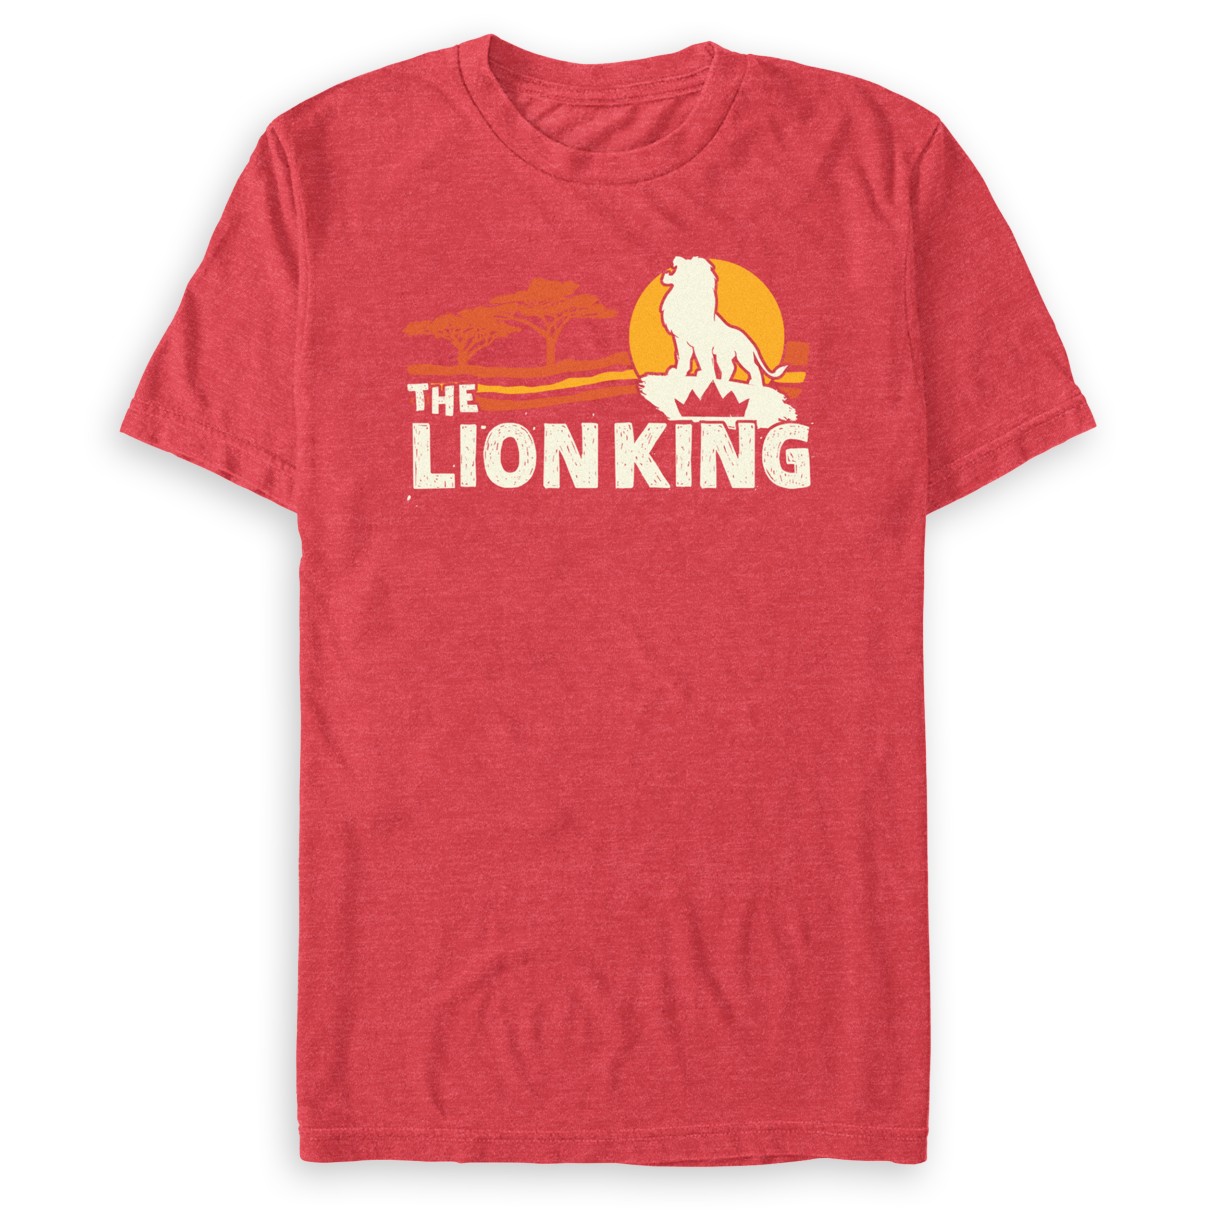 The Lion King Heathered T-Shirt for Adults